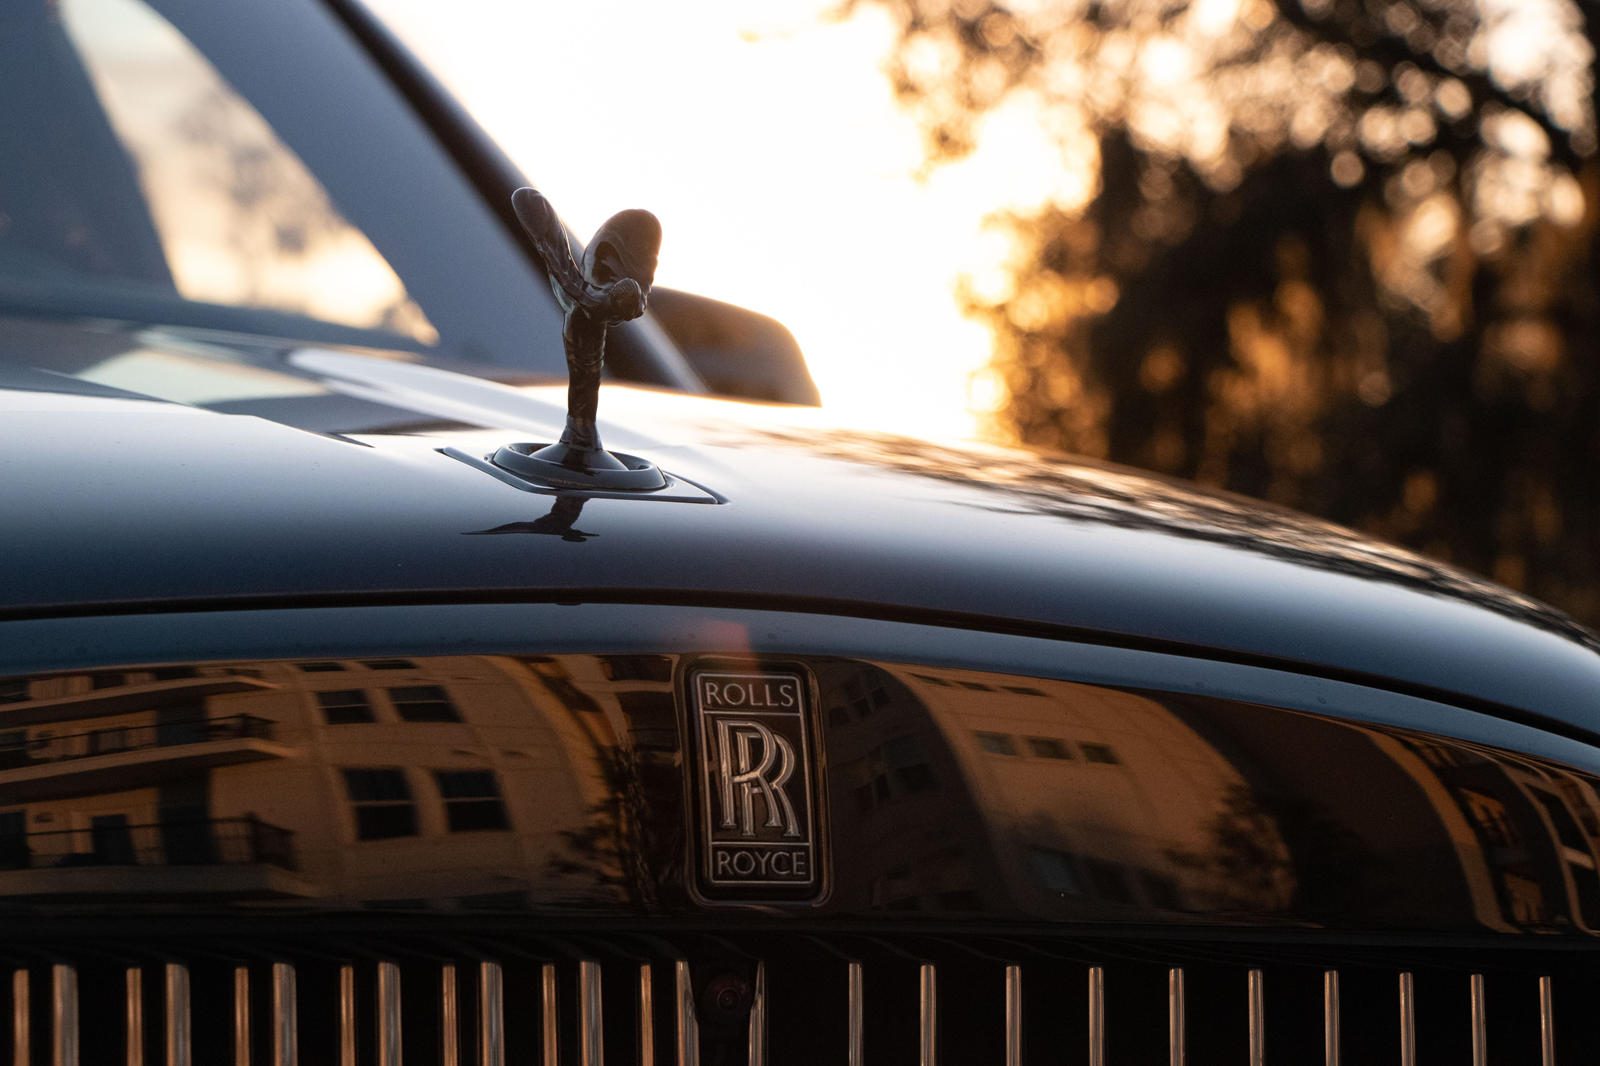 Rolls-Royce Cullinan SUV to Get a Refreshing Mid-Life Upgrade